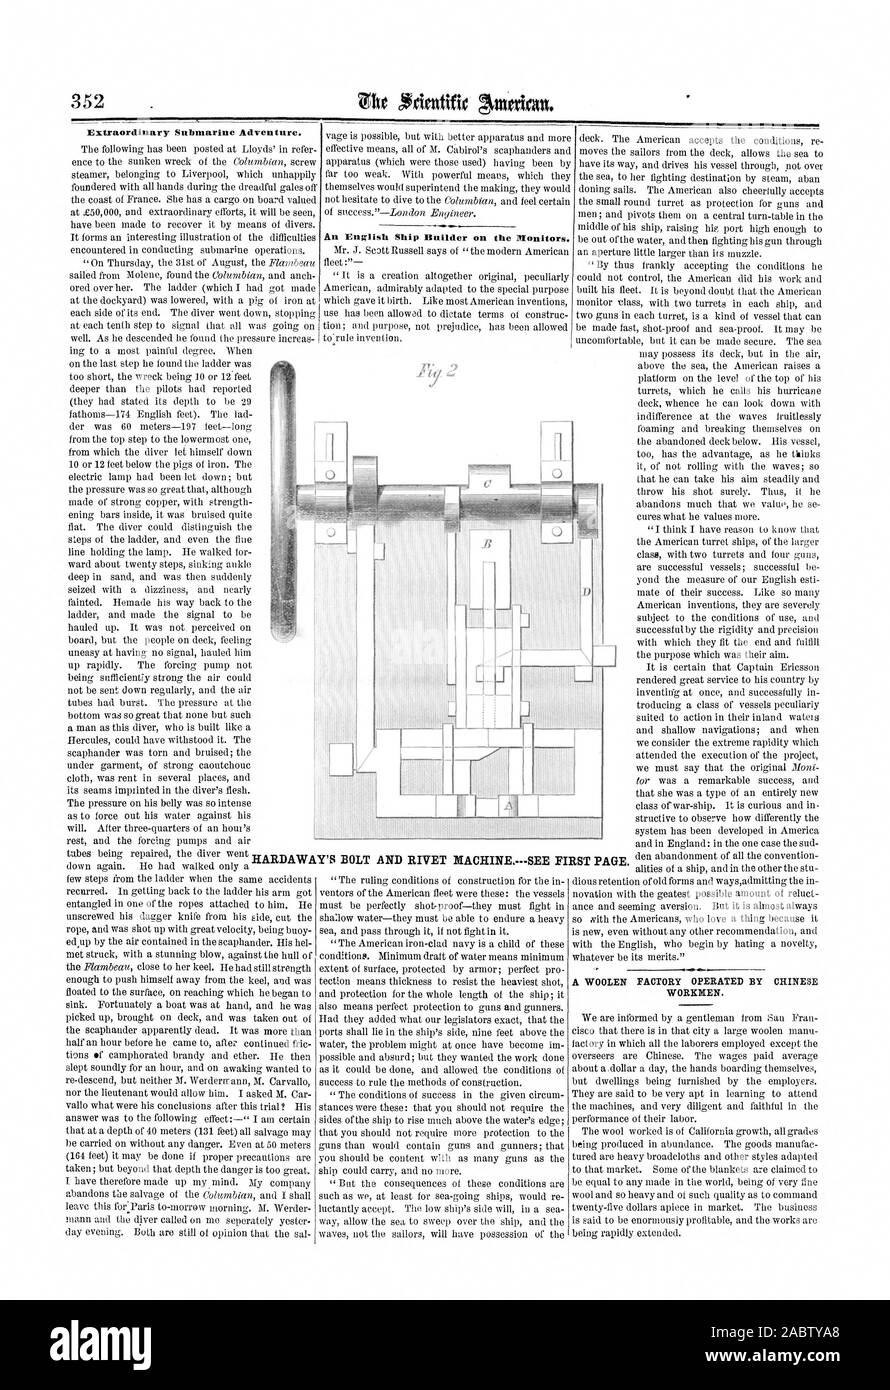 Extraordinary Submarine Adventure. HARDAWAY S BOLT An English Ship Builder on the Monitors. AND RIVET MACHINE.SEE FIRST PAGE., scientific american, 1865-12-02 Stock Photo